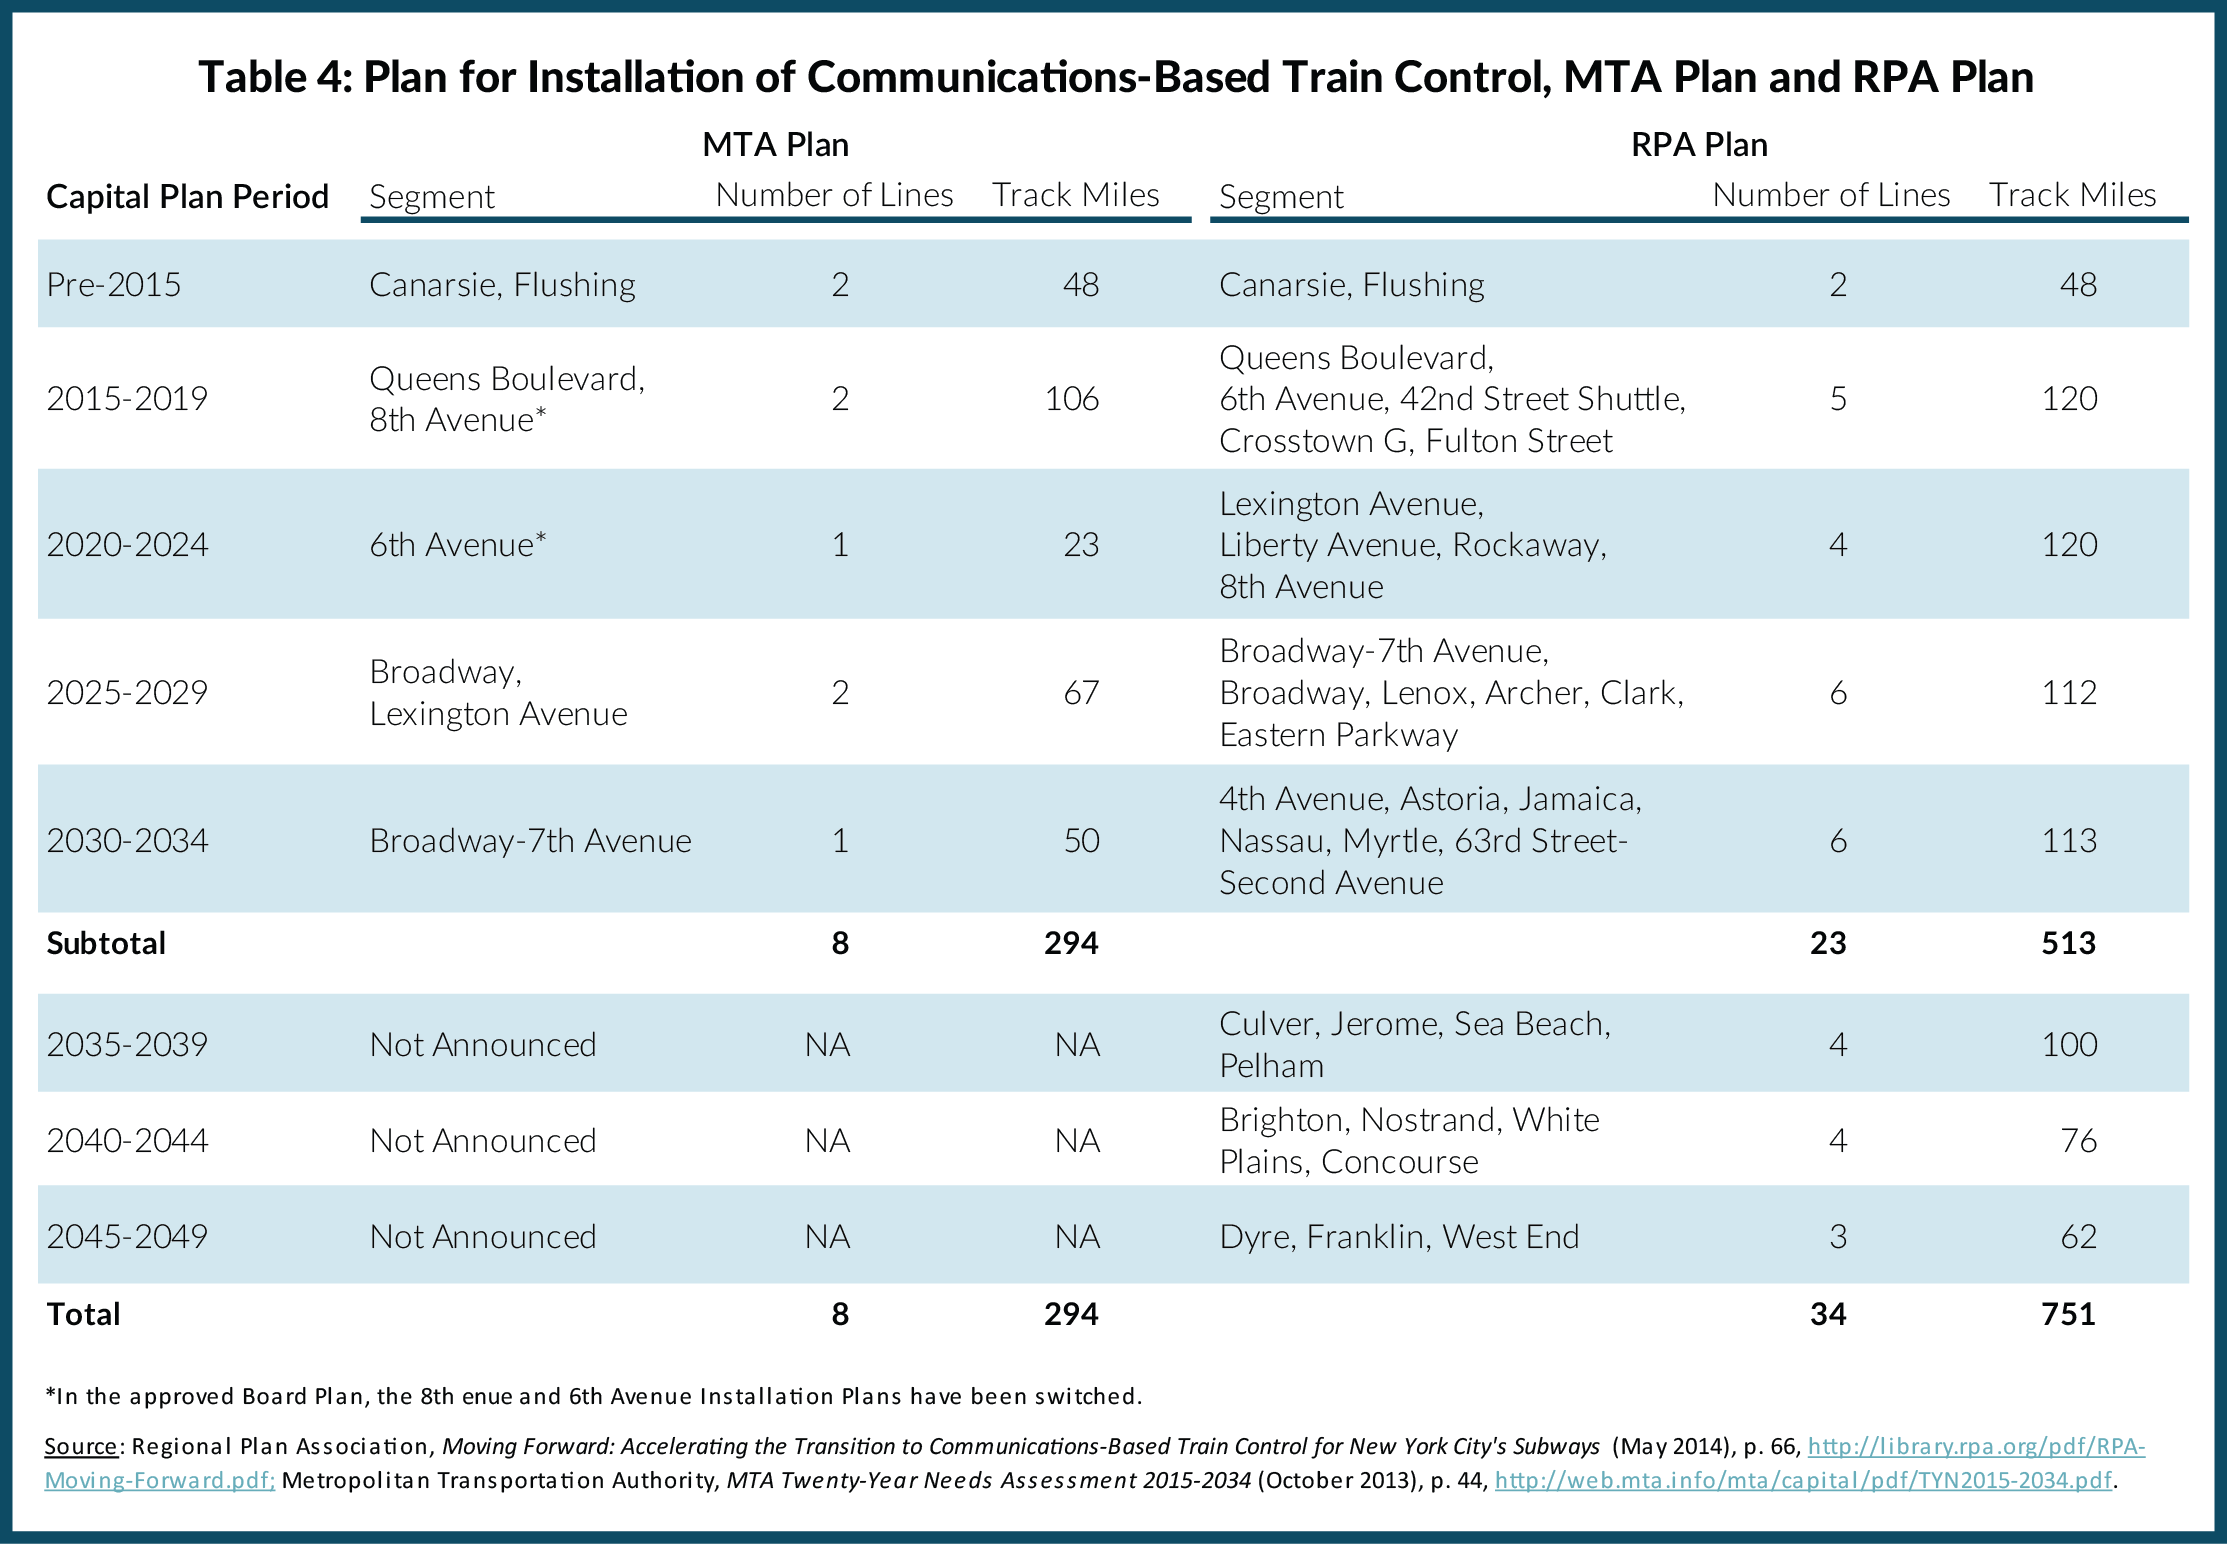 Table 4: Plan for Installation of Communications Based Train Control, MTA Plan and RPA Plan